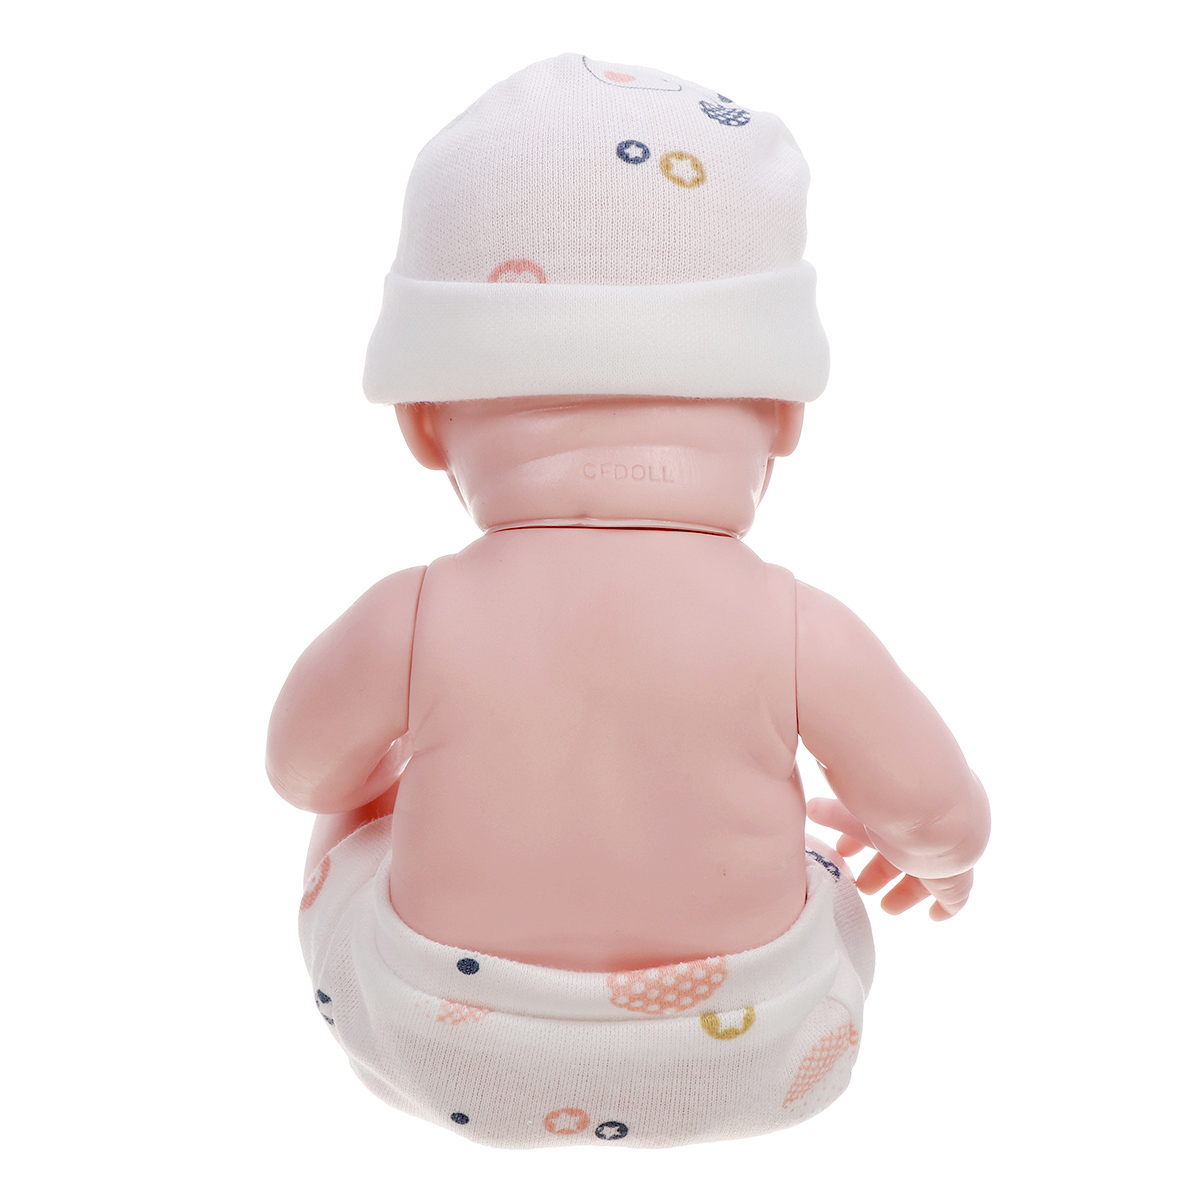 9.5inch Baby Doll Real Life Soft Silicone Doll Baby Girl Realistic Handmade Baby Doll Toy